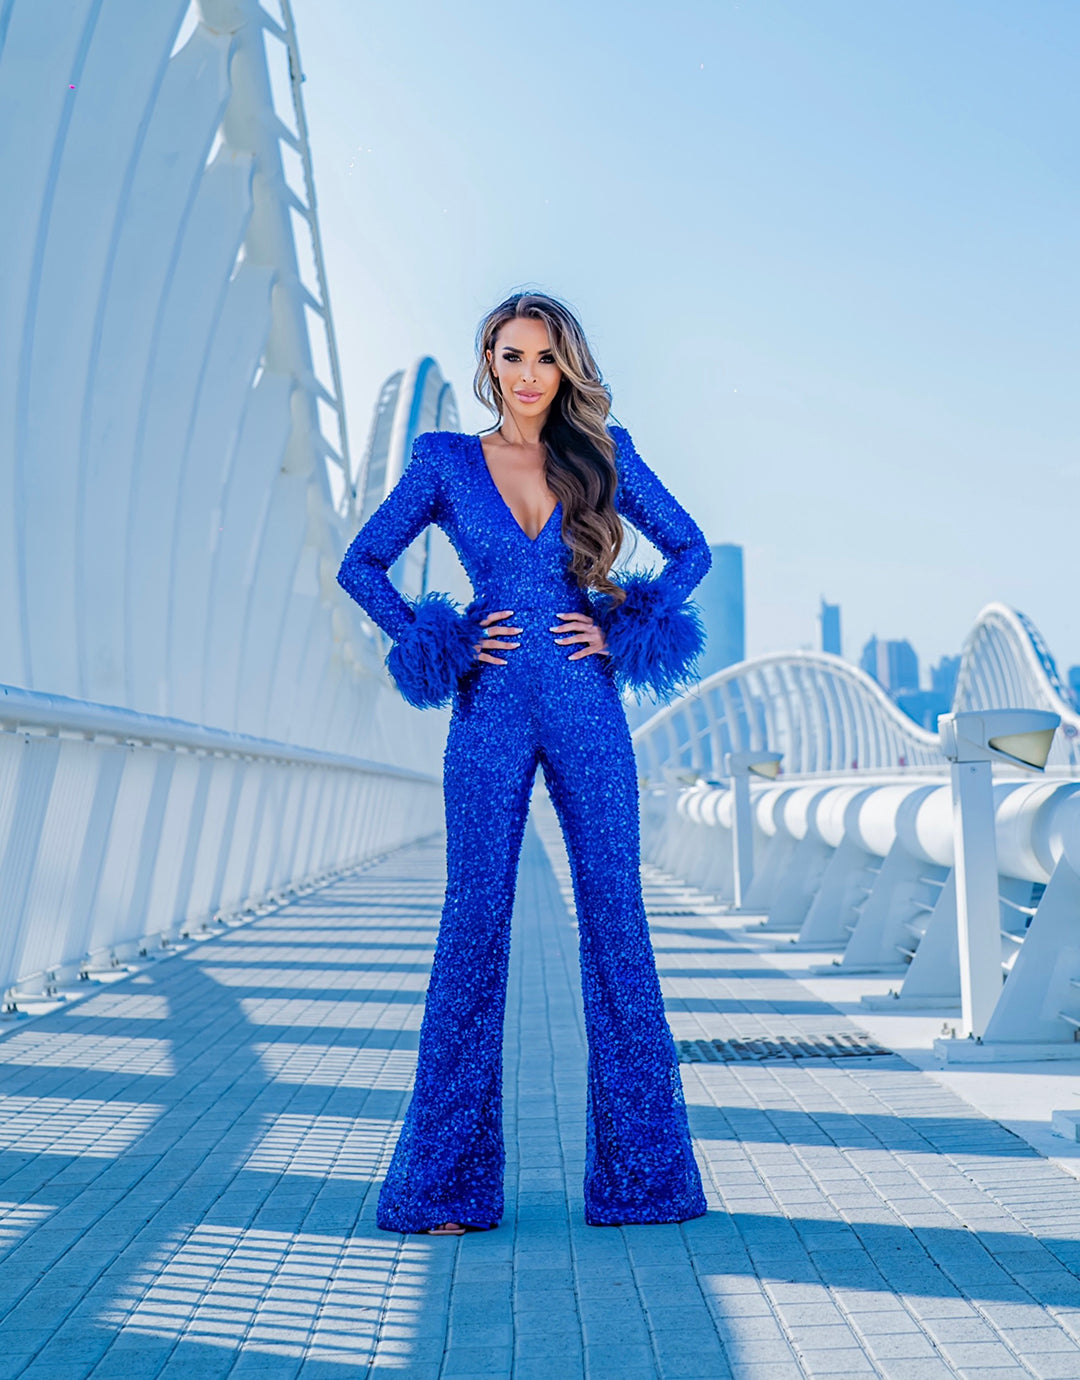 Royal Blue Beaded Sequined Sheath Blue Sequin Jumpsuit For Plus Size Women  Perfect For Prom, Formal Parties, And Evening Events In 2021 From Langju22,  $128.9